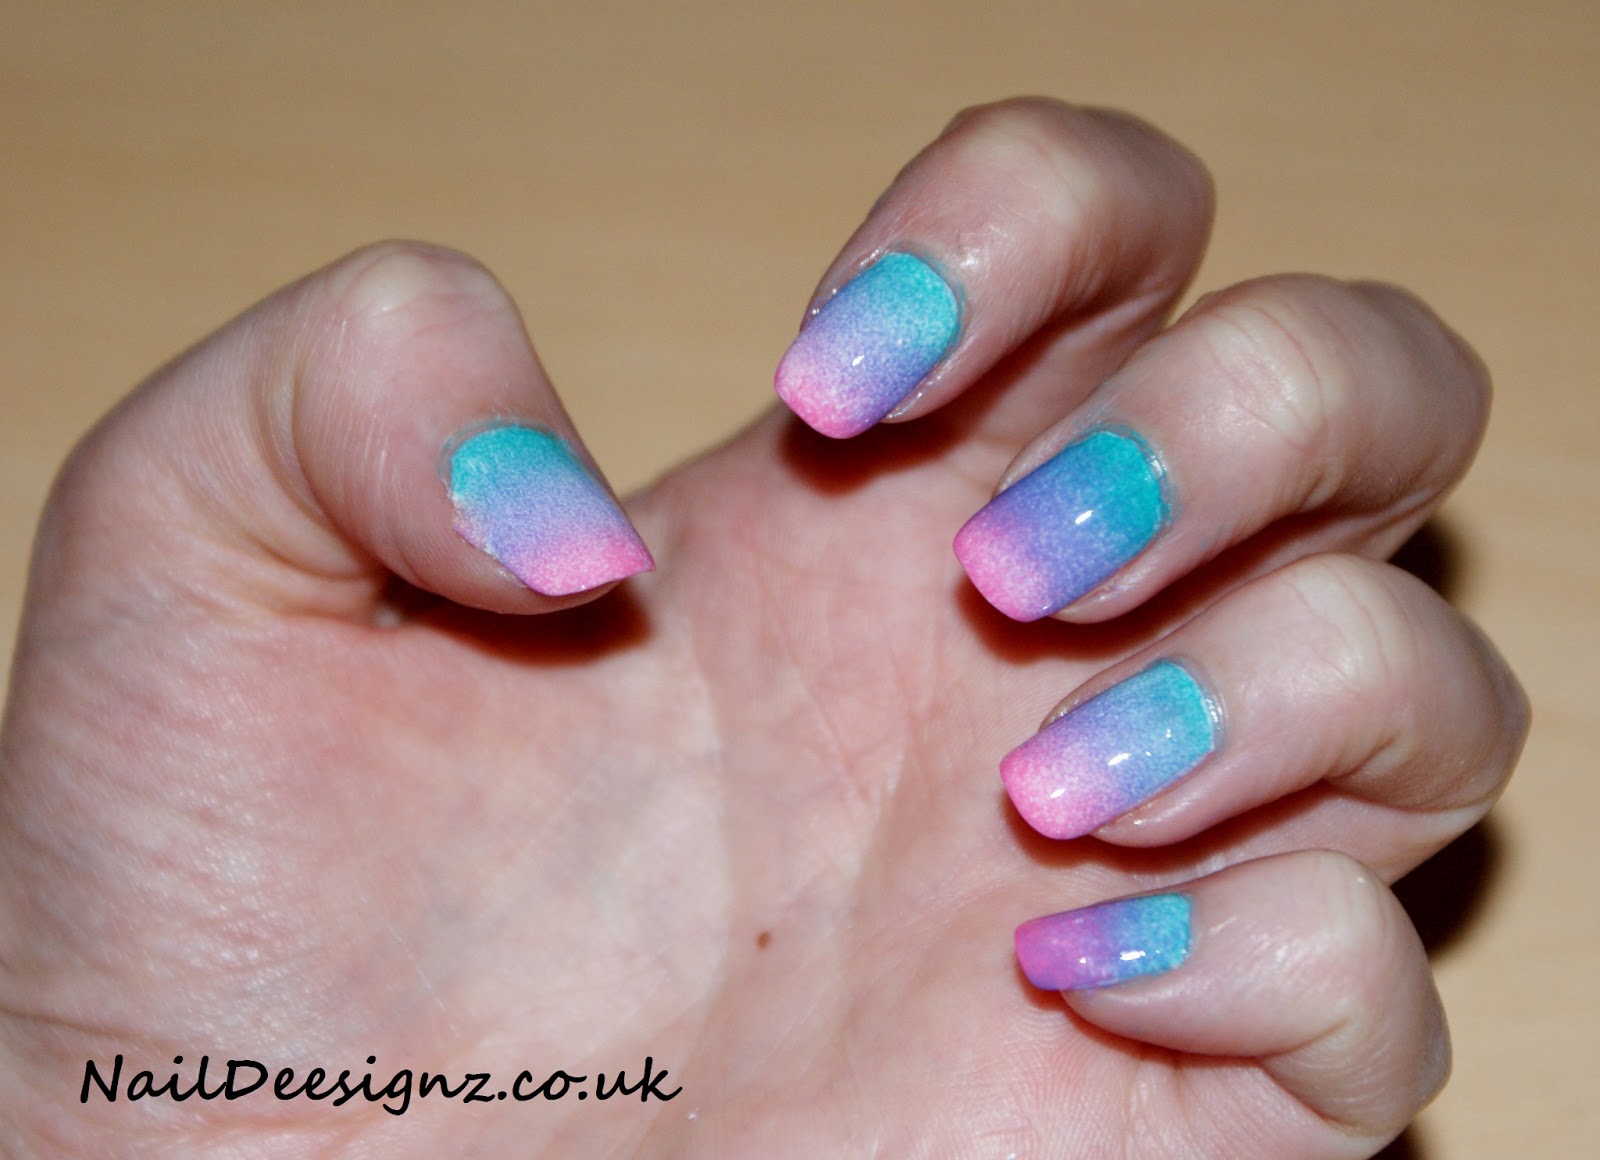 3. Ombre Nail Art - wide 8